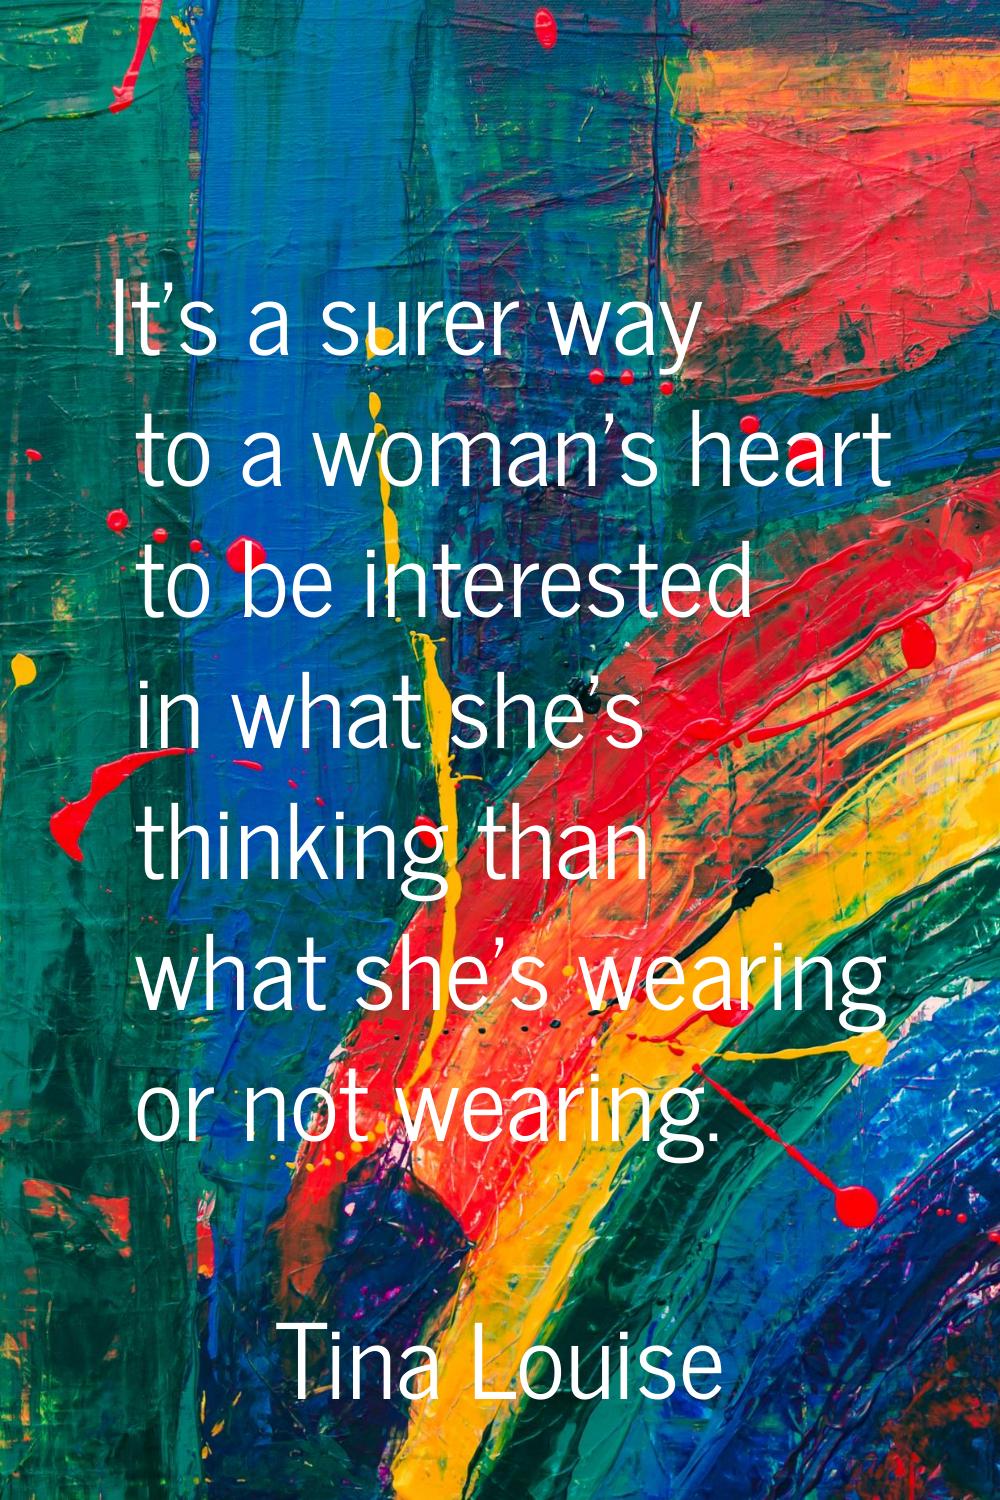 It's a surer way to a woman's heart to be interested in what she's thinking than what she's wearing